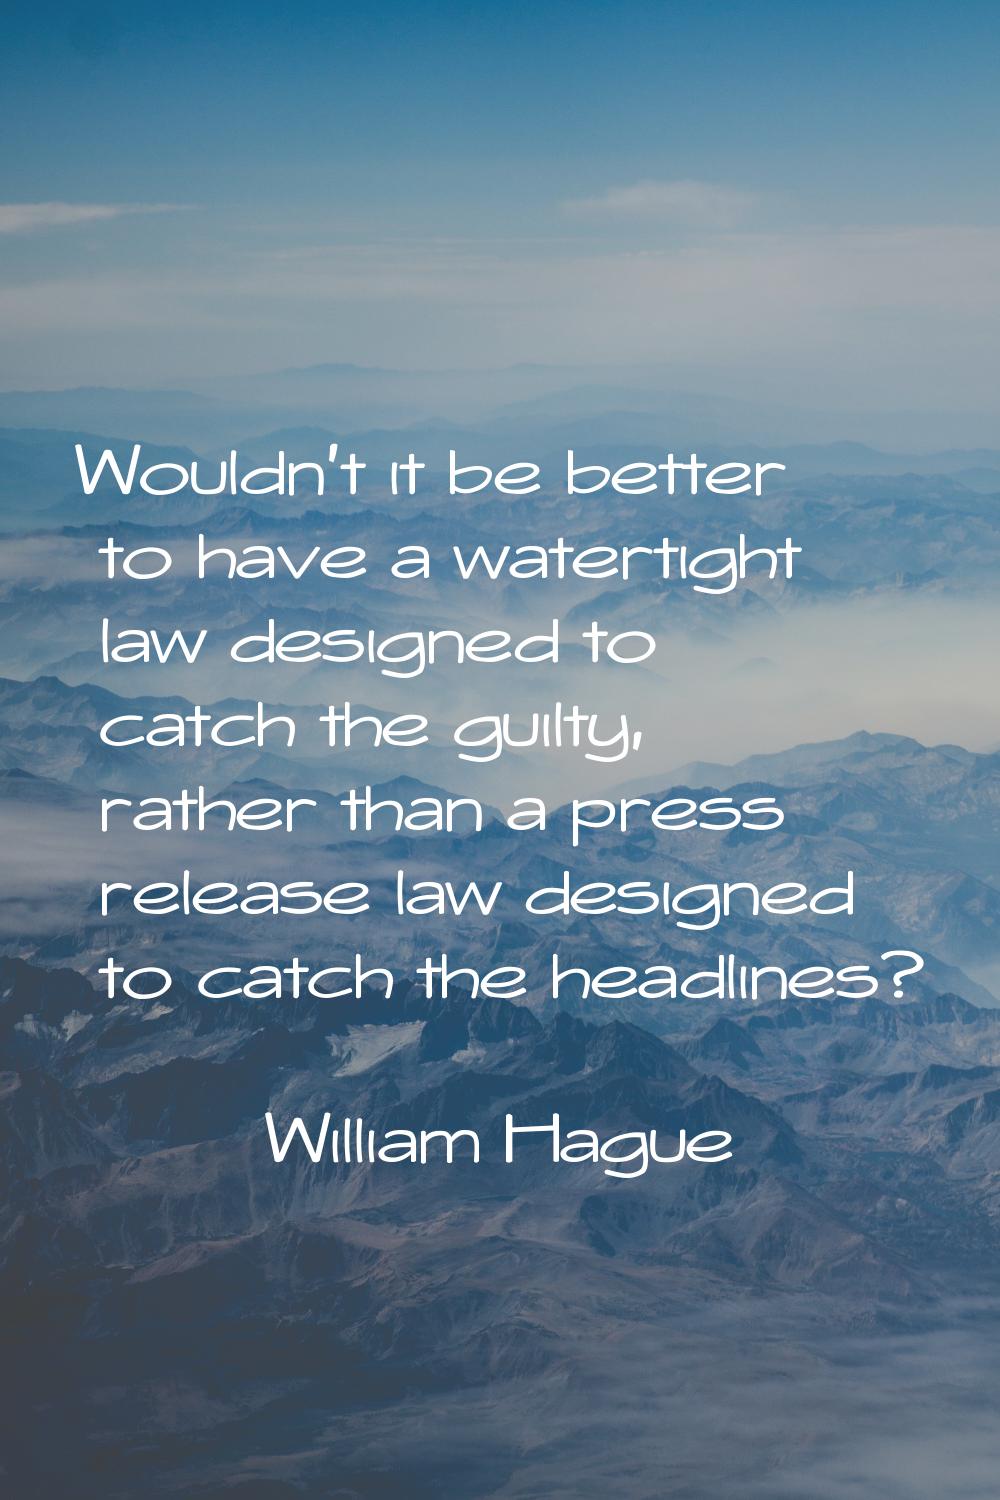 Wouldn't it be better to have a watertight law designed to catch the guilty, rather than a press re